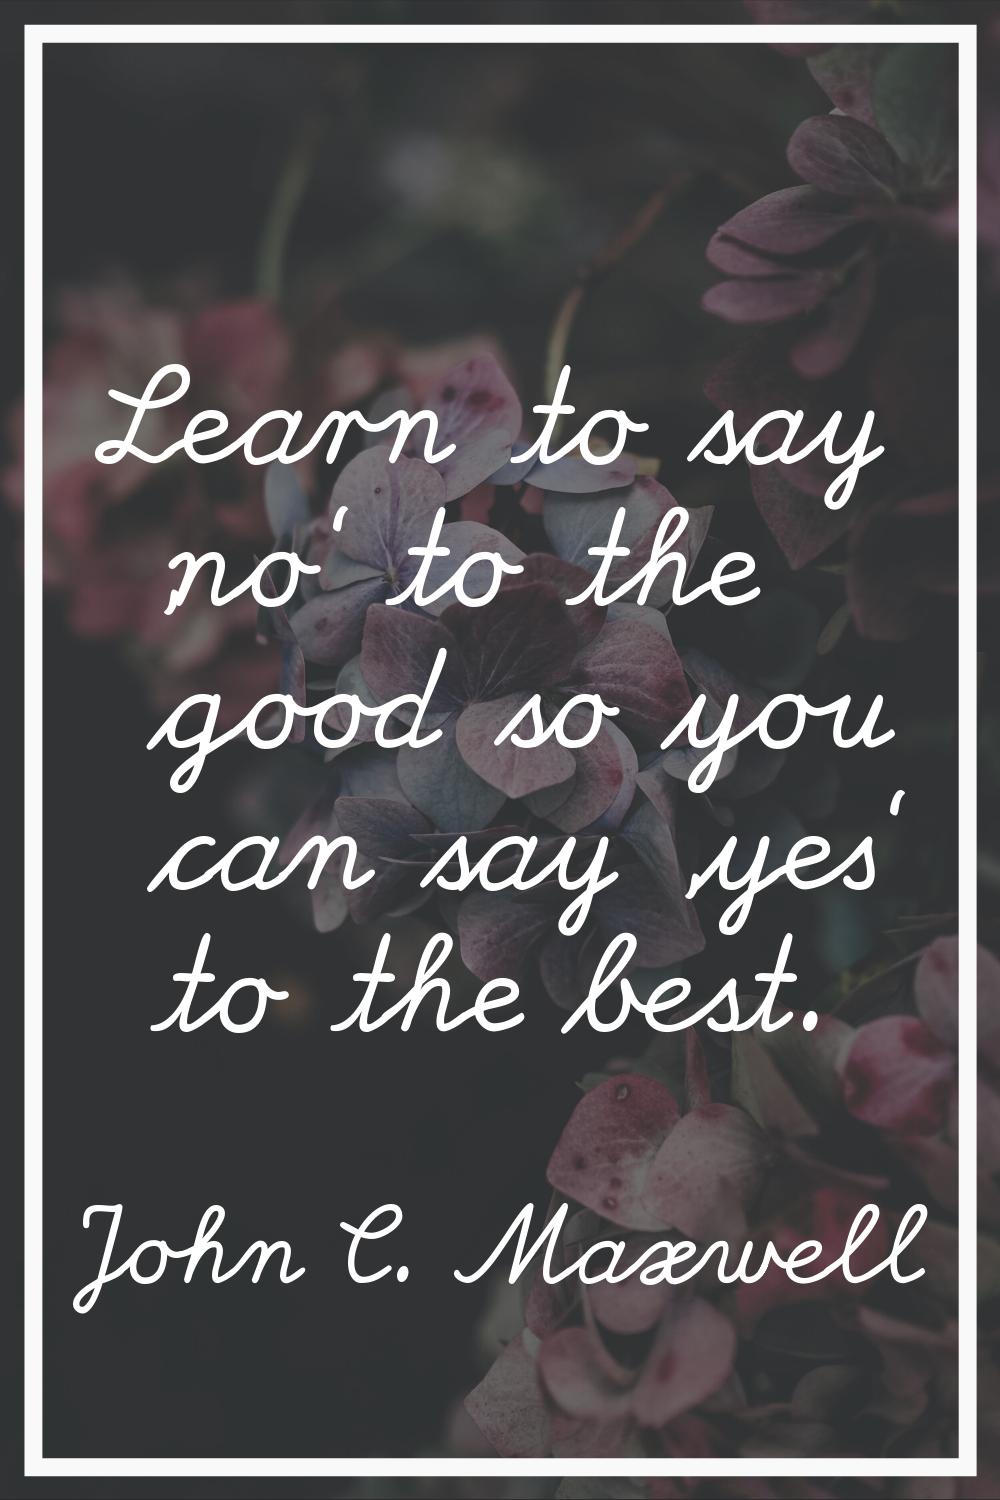 Learn to say 'no' to the good so you can say 'yes' to the best.